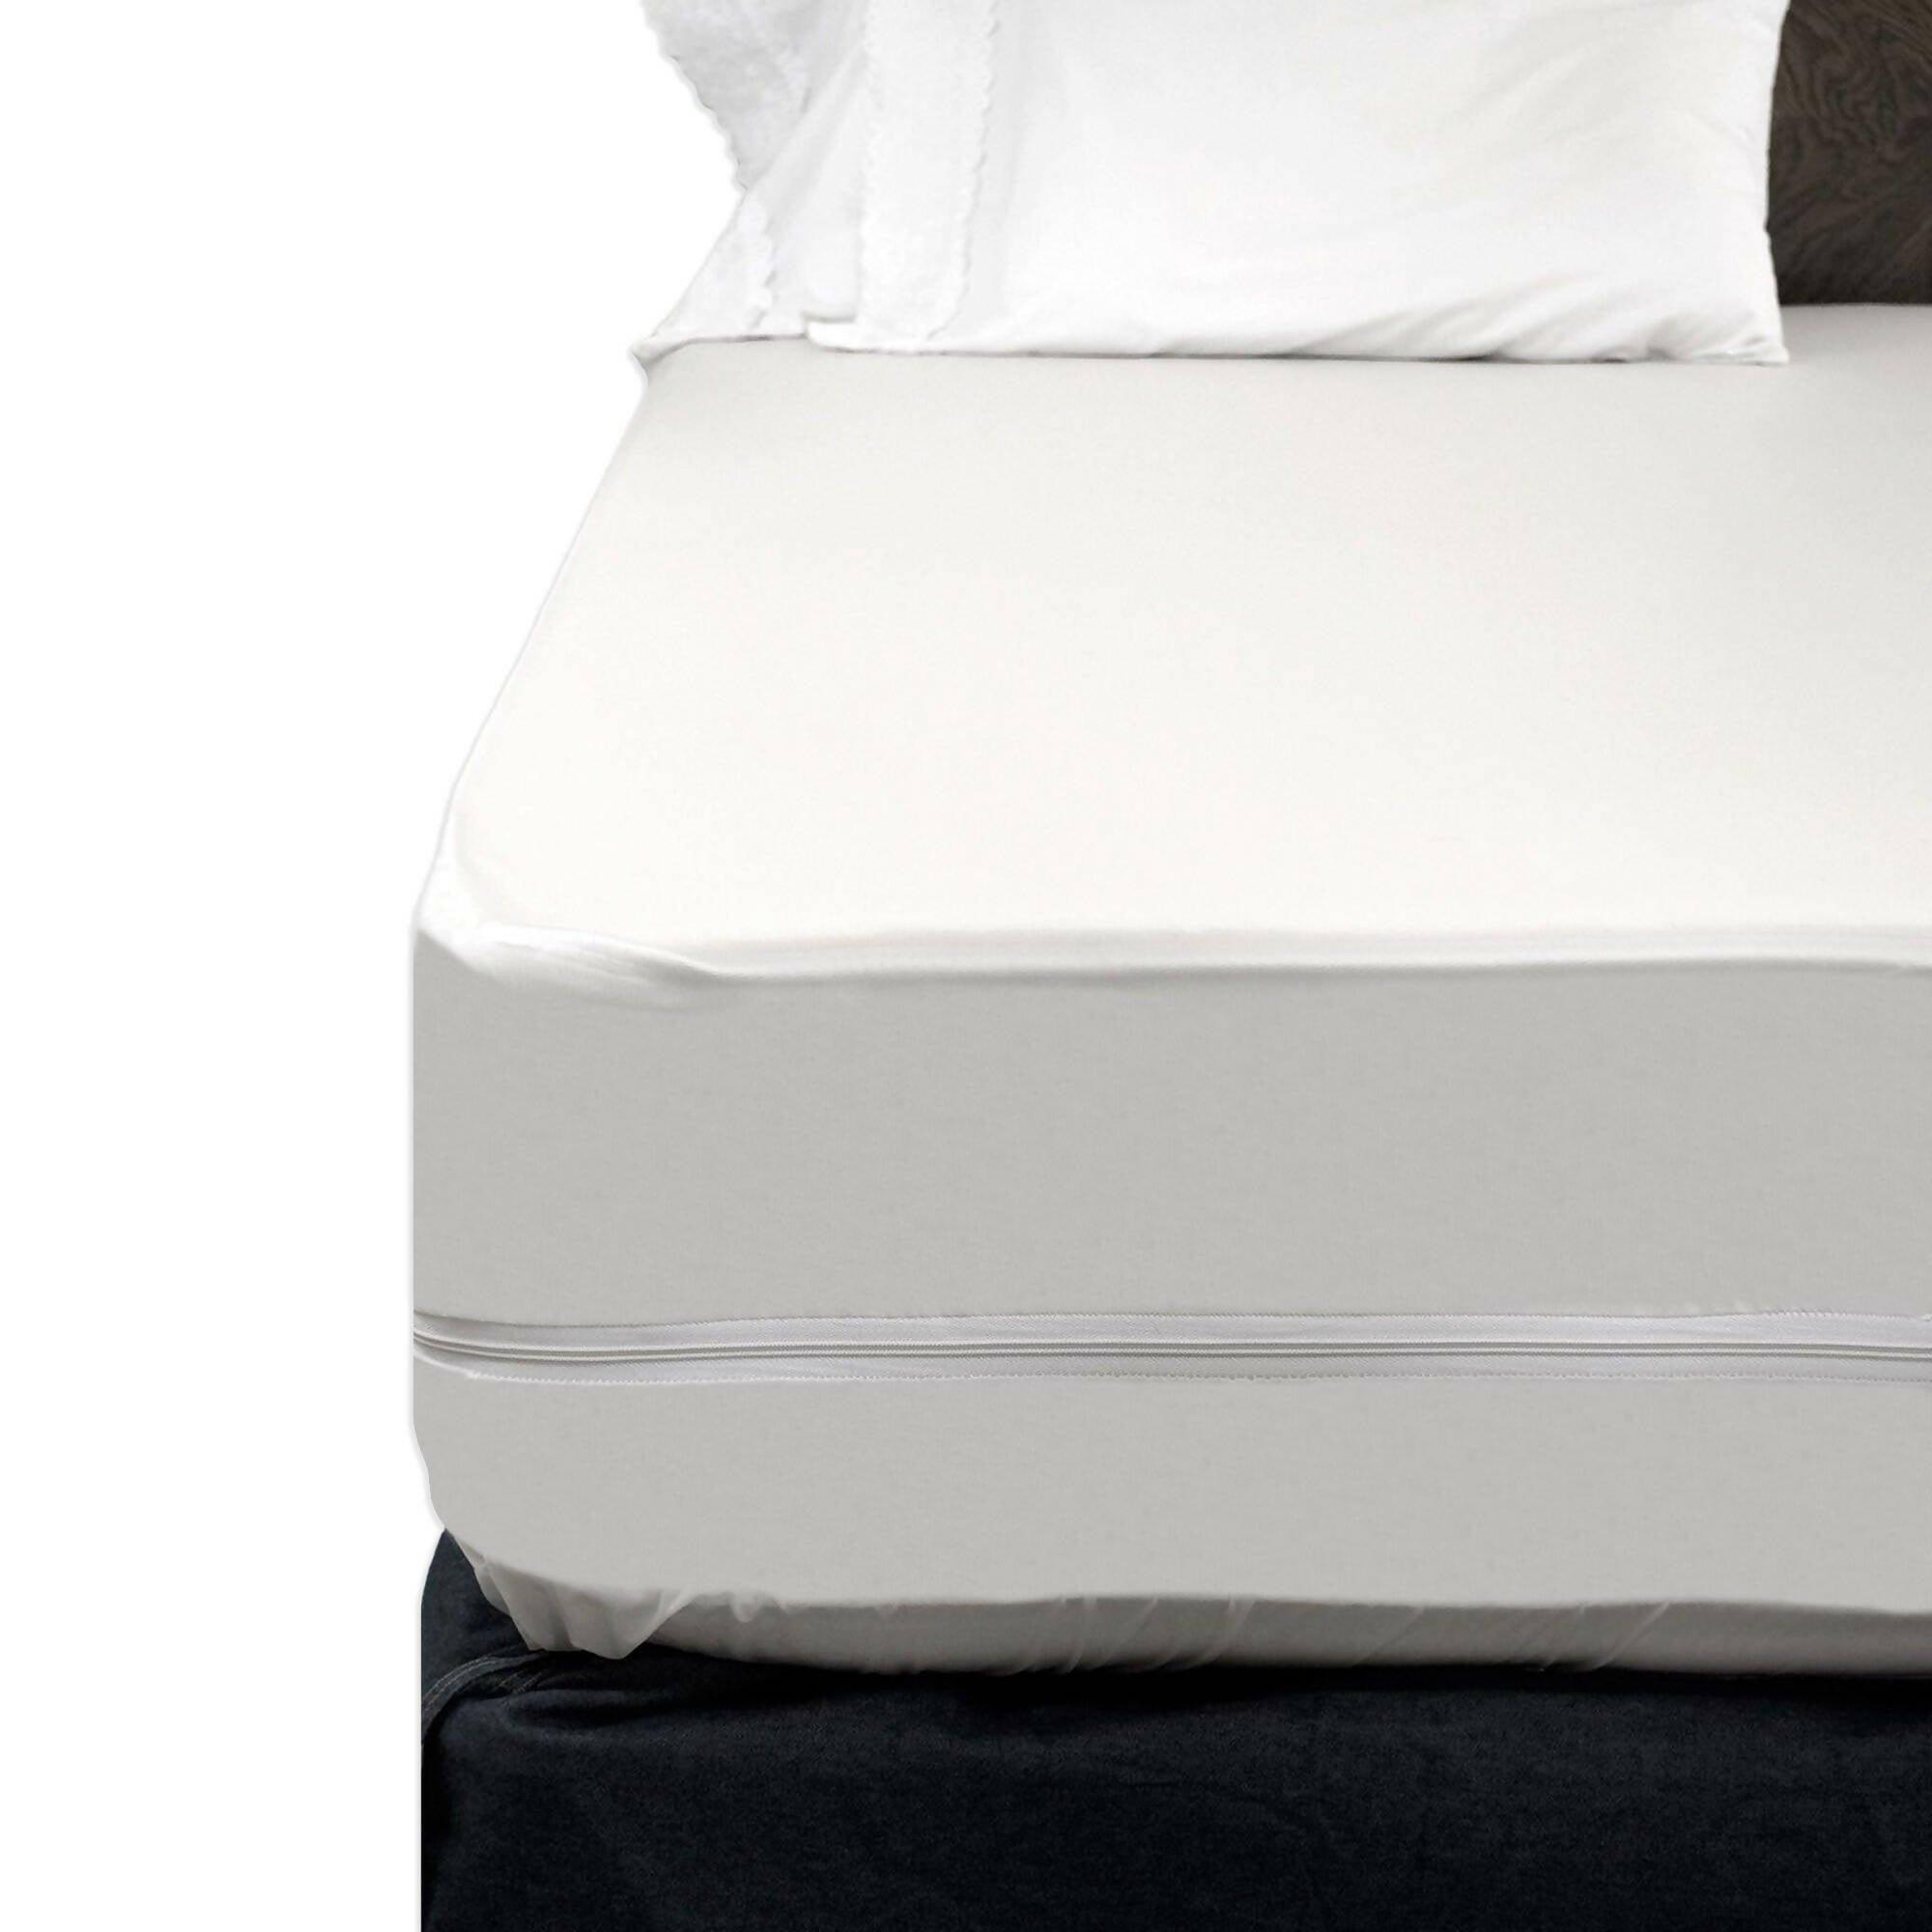 Waterproof mattress cover with zipper 6 sided safety - ValueBox